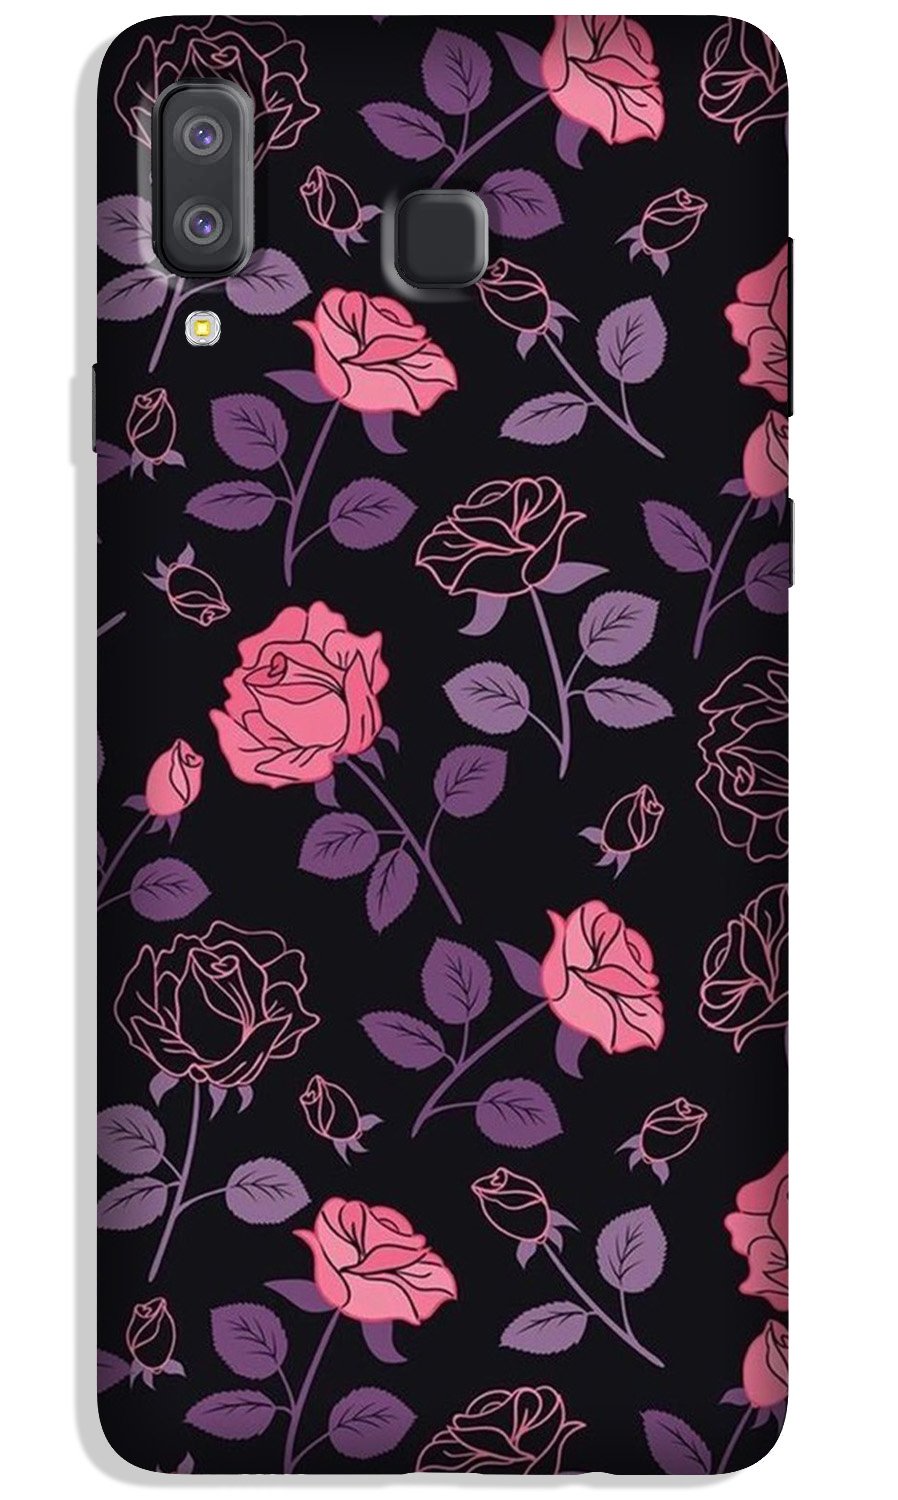 Rose Pattern Case for Galaxy A8 Star